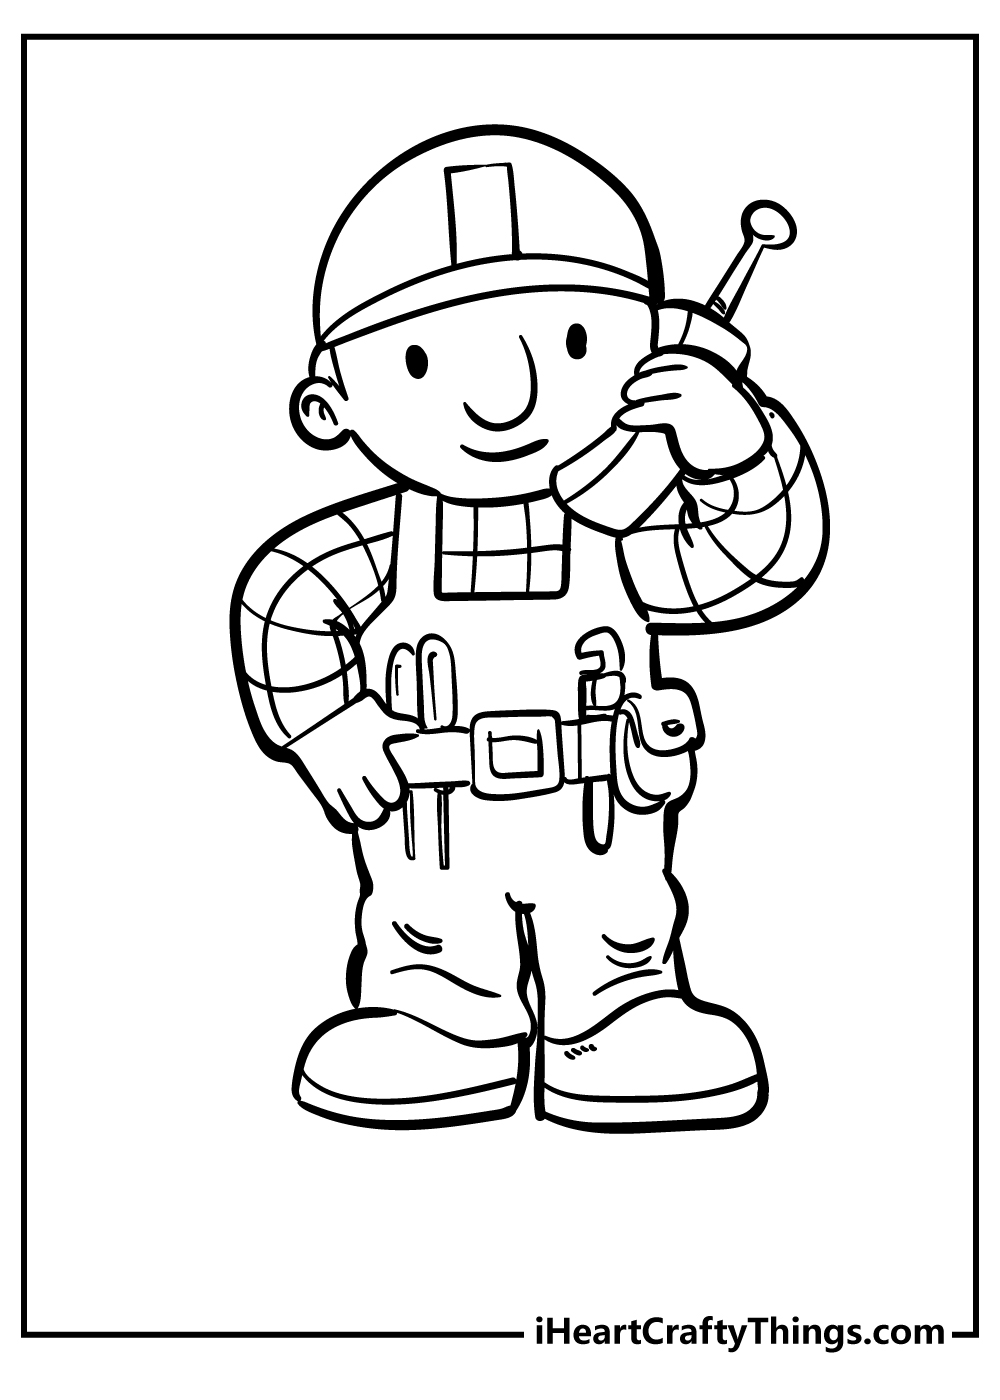 Bob the Builder Coloring Sheet for children free download